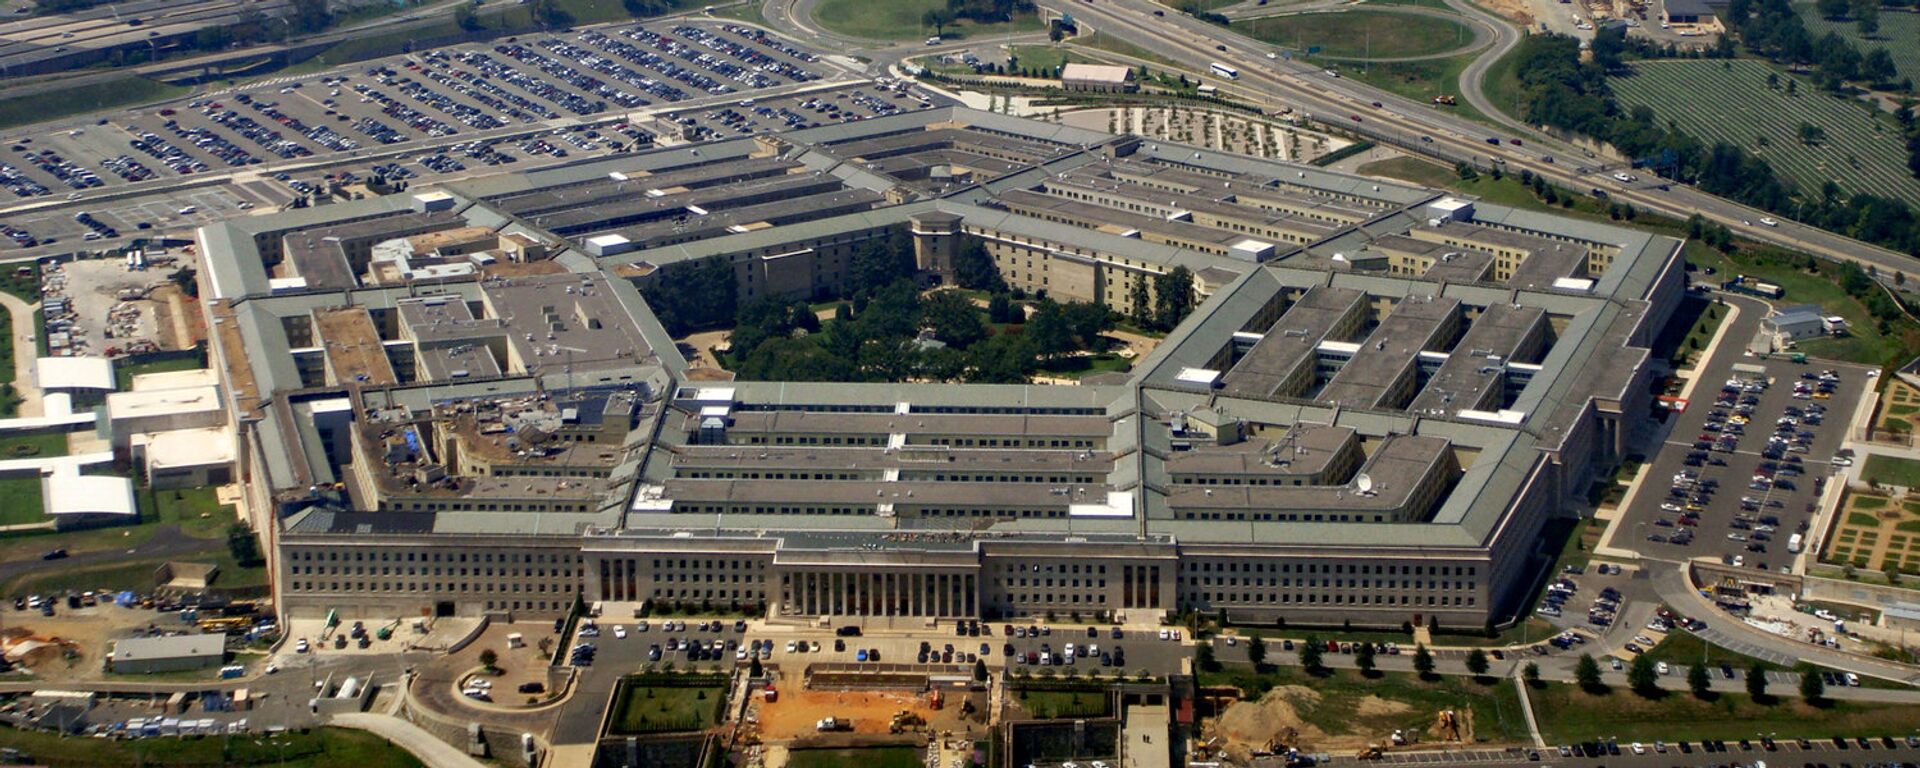 Aerial view of the Pentagon - 俄羅斯衛星通訊社, 1920, 09.04.2021